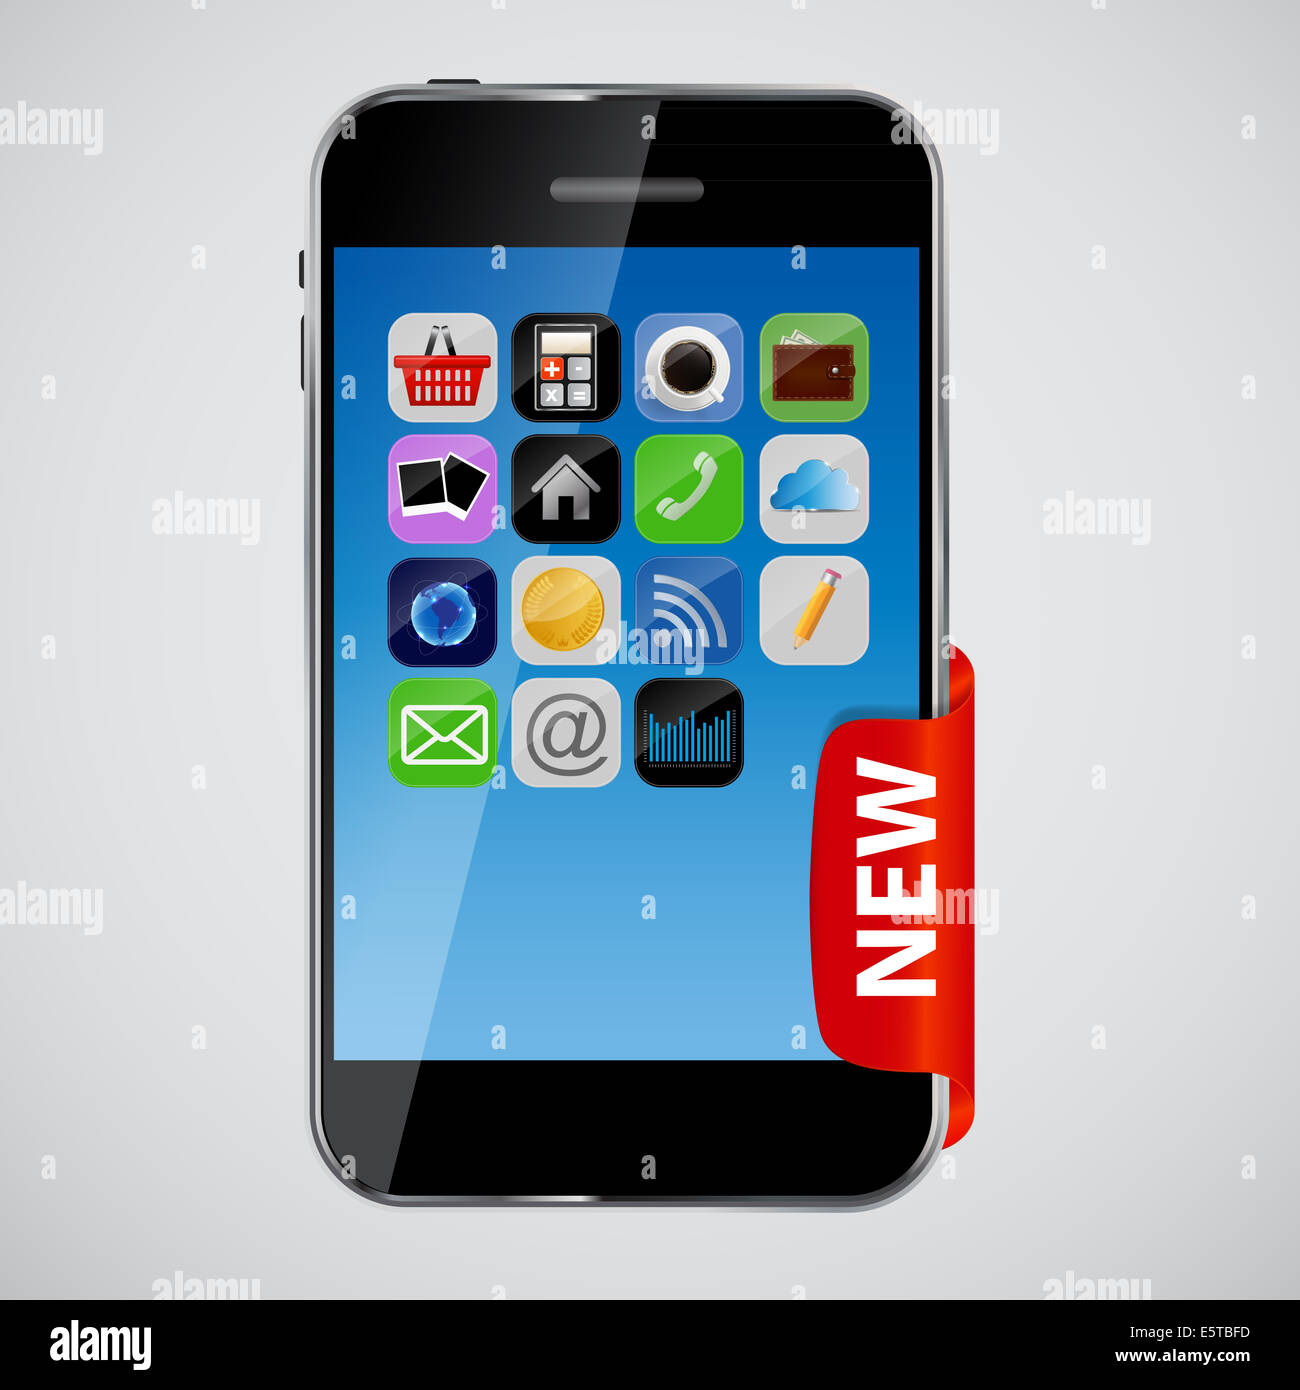 Mobile Phone with Red Label Vector Illustration Stock Photo